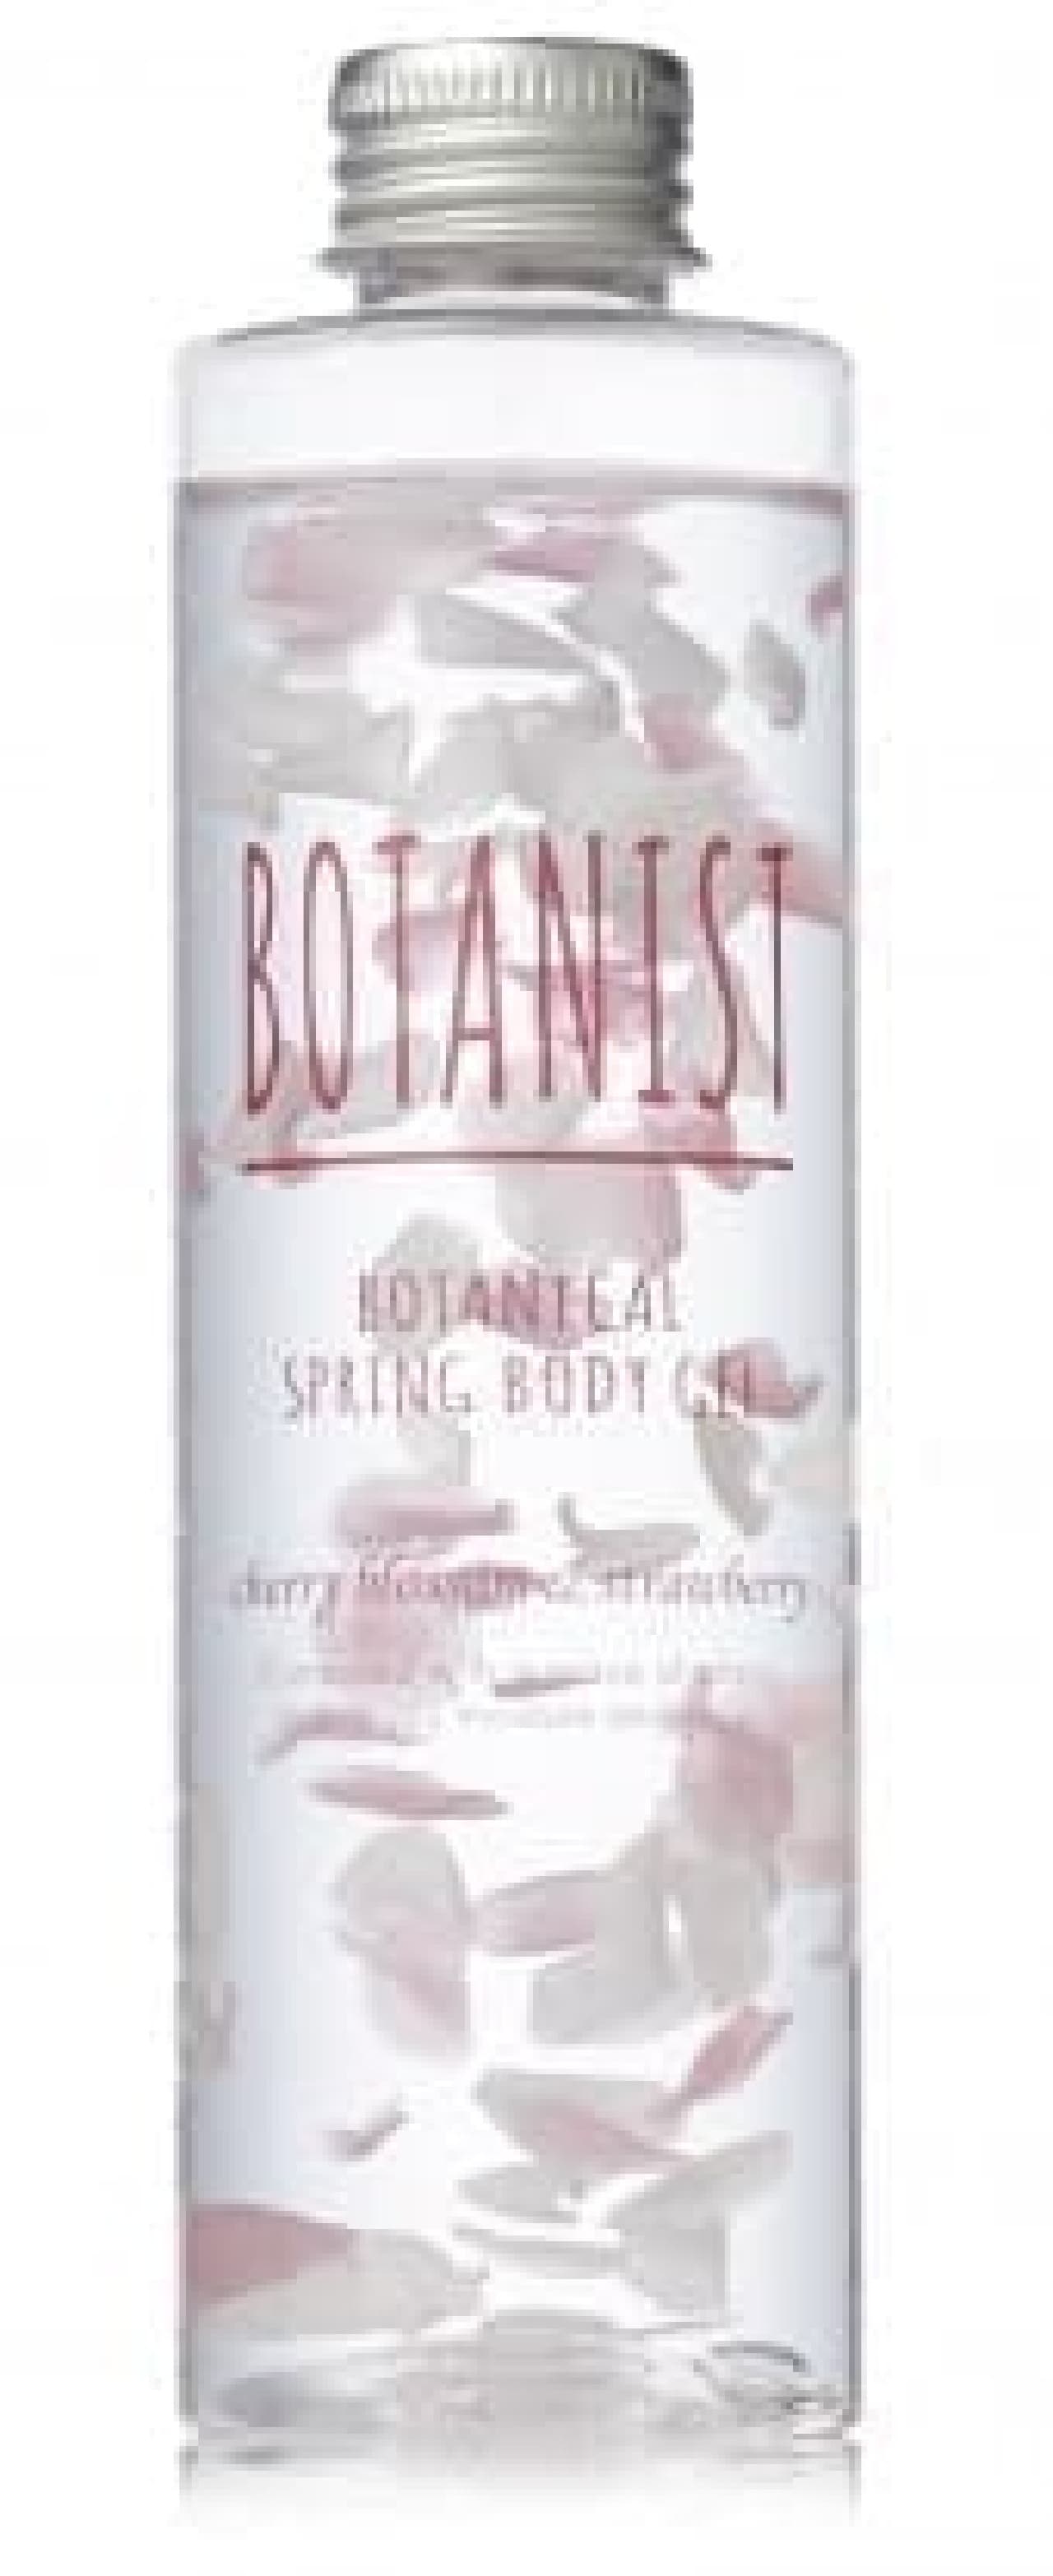 Limited item with the scent of cherry blossoms from Botanist